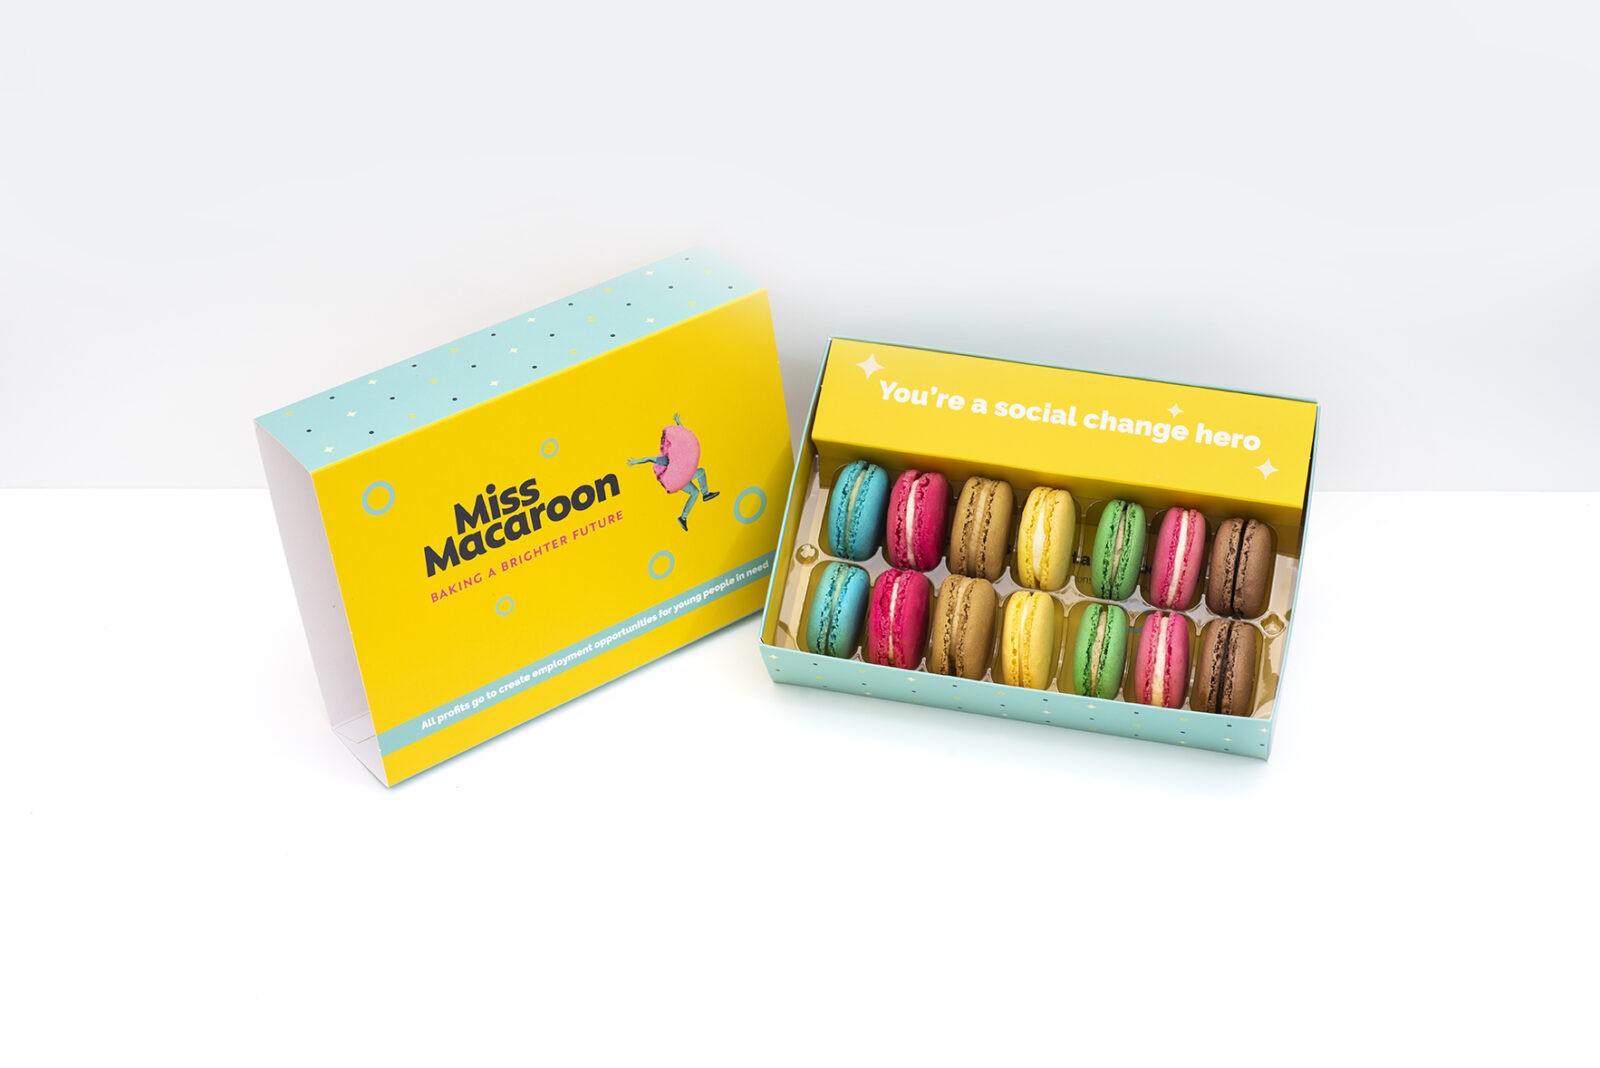 Mother's Day Flowers Macaron Gift Box